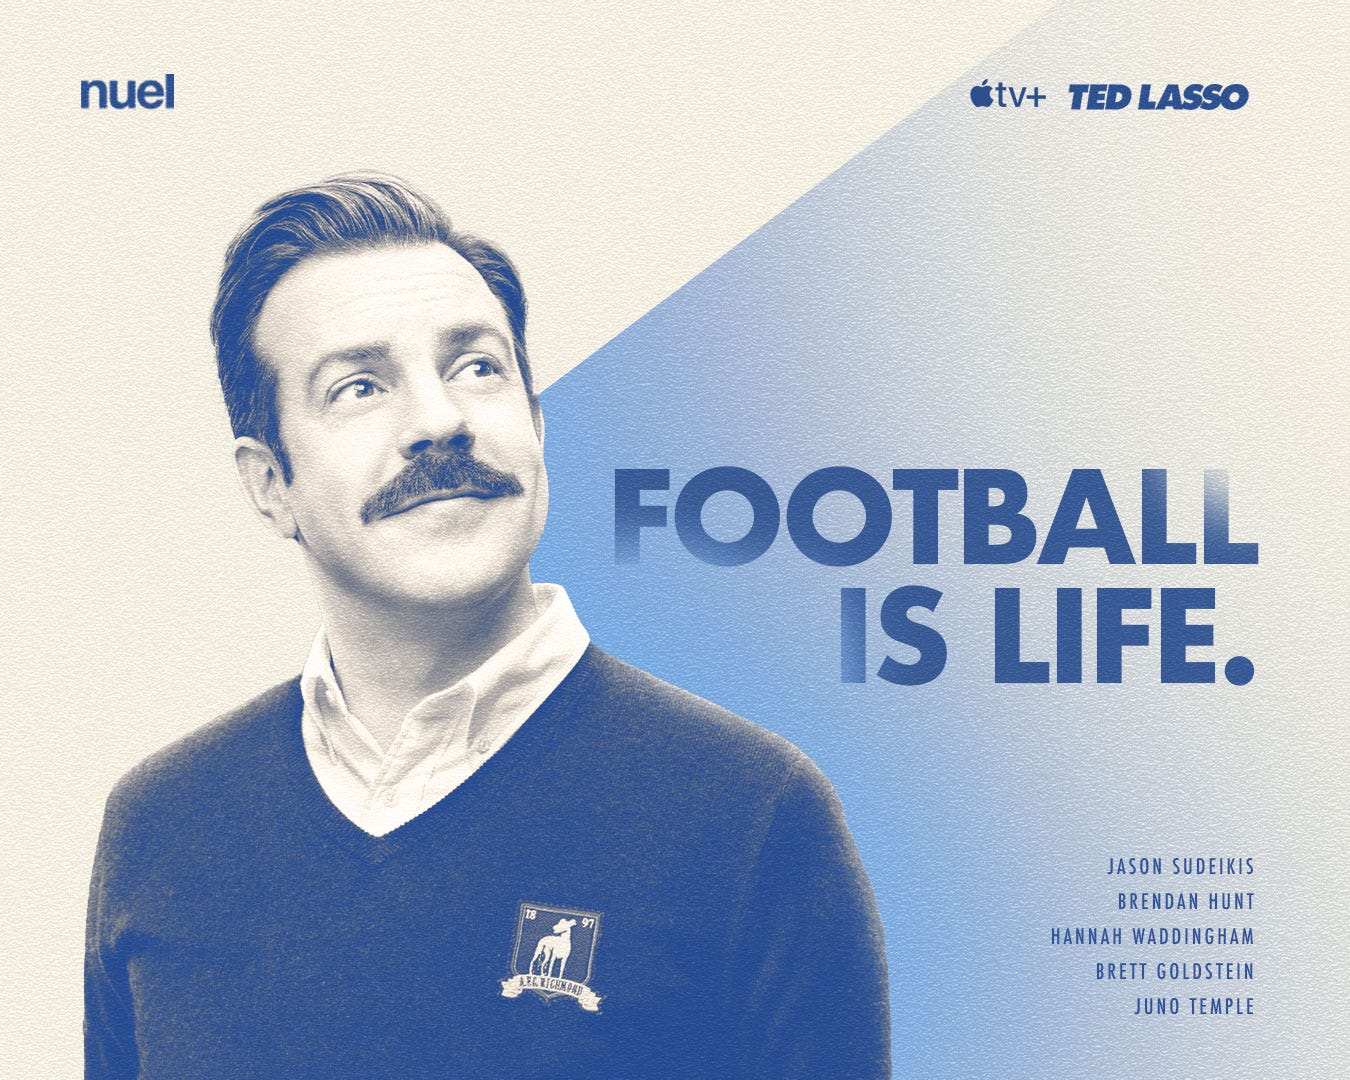 Ted Lasso: Every Real Life Footballer The Characters Are Based On